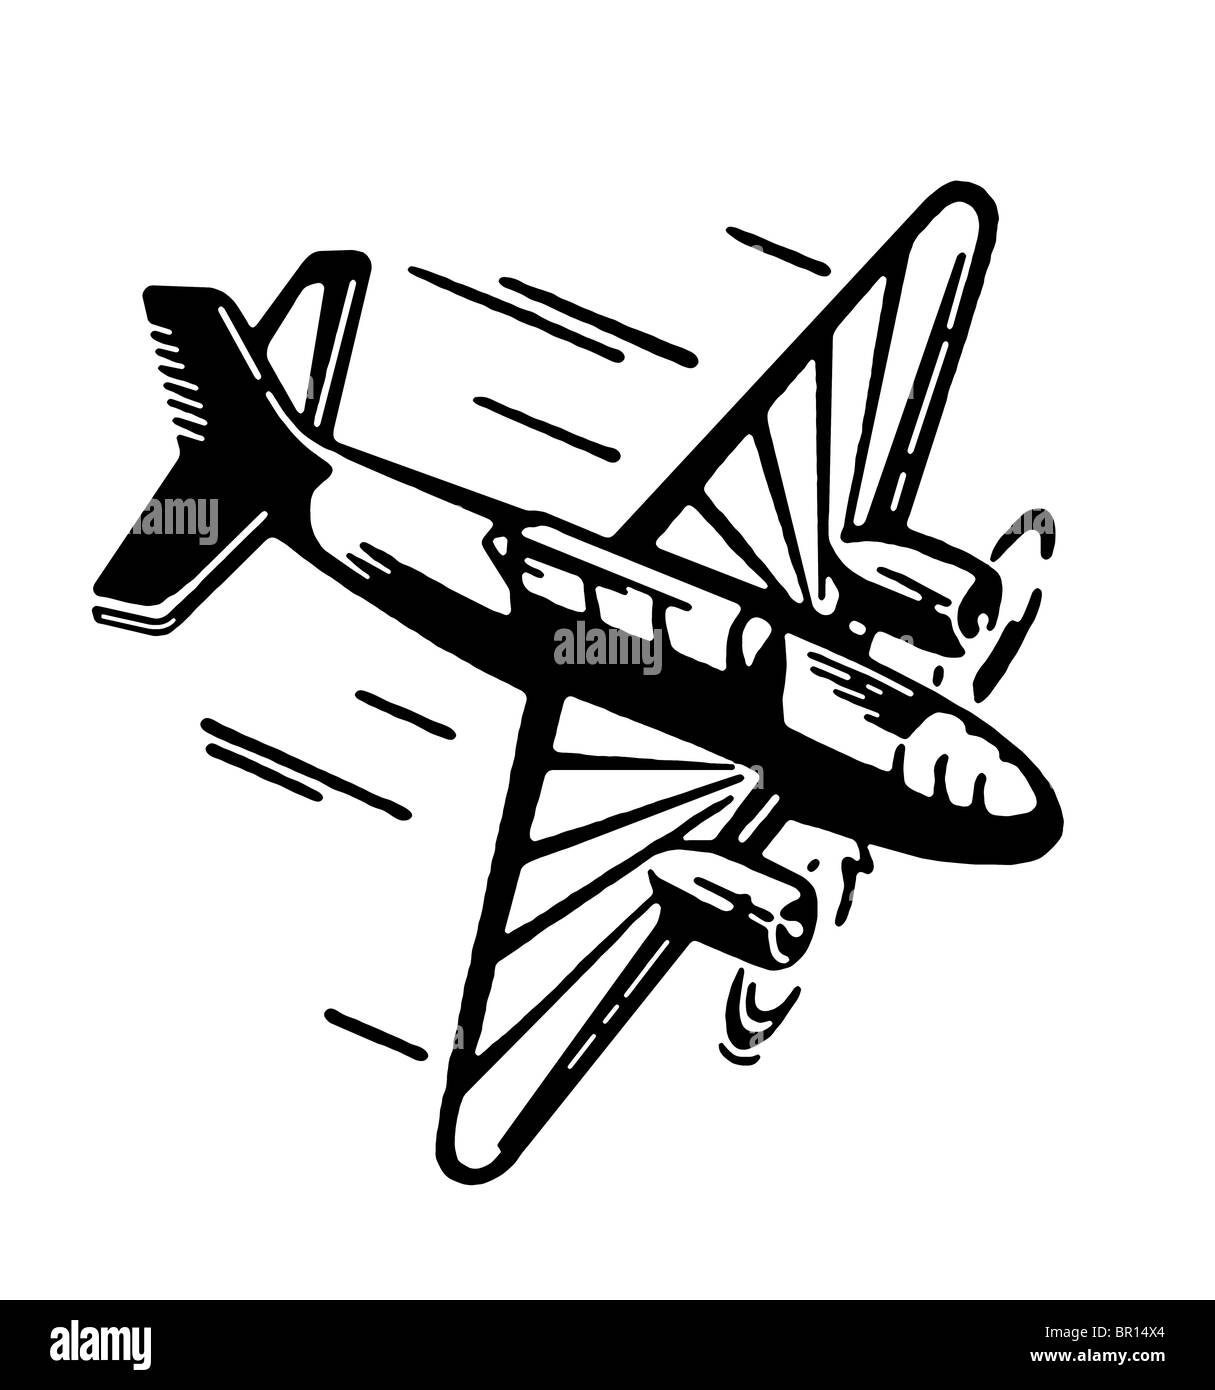 A black and white version of a vintage illustration of an airplane Stock Photo